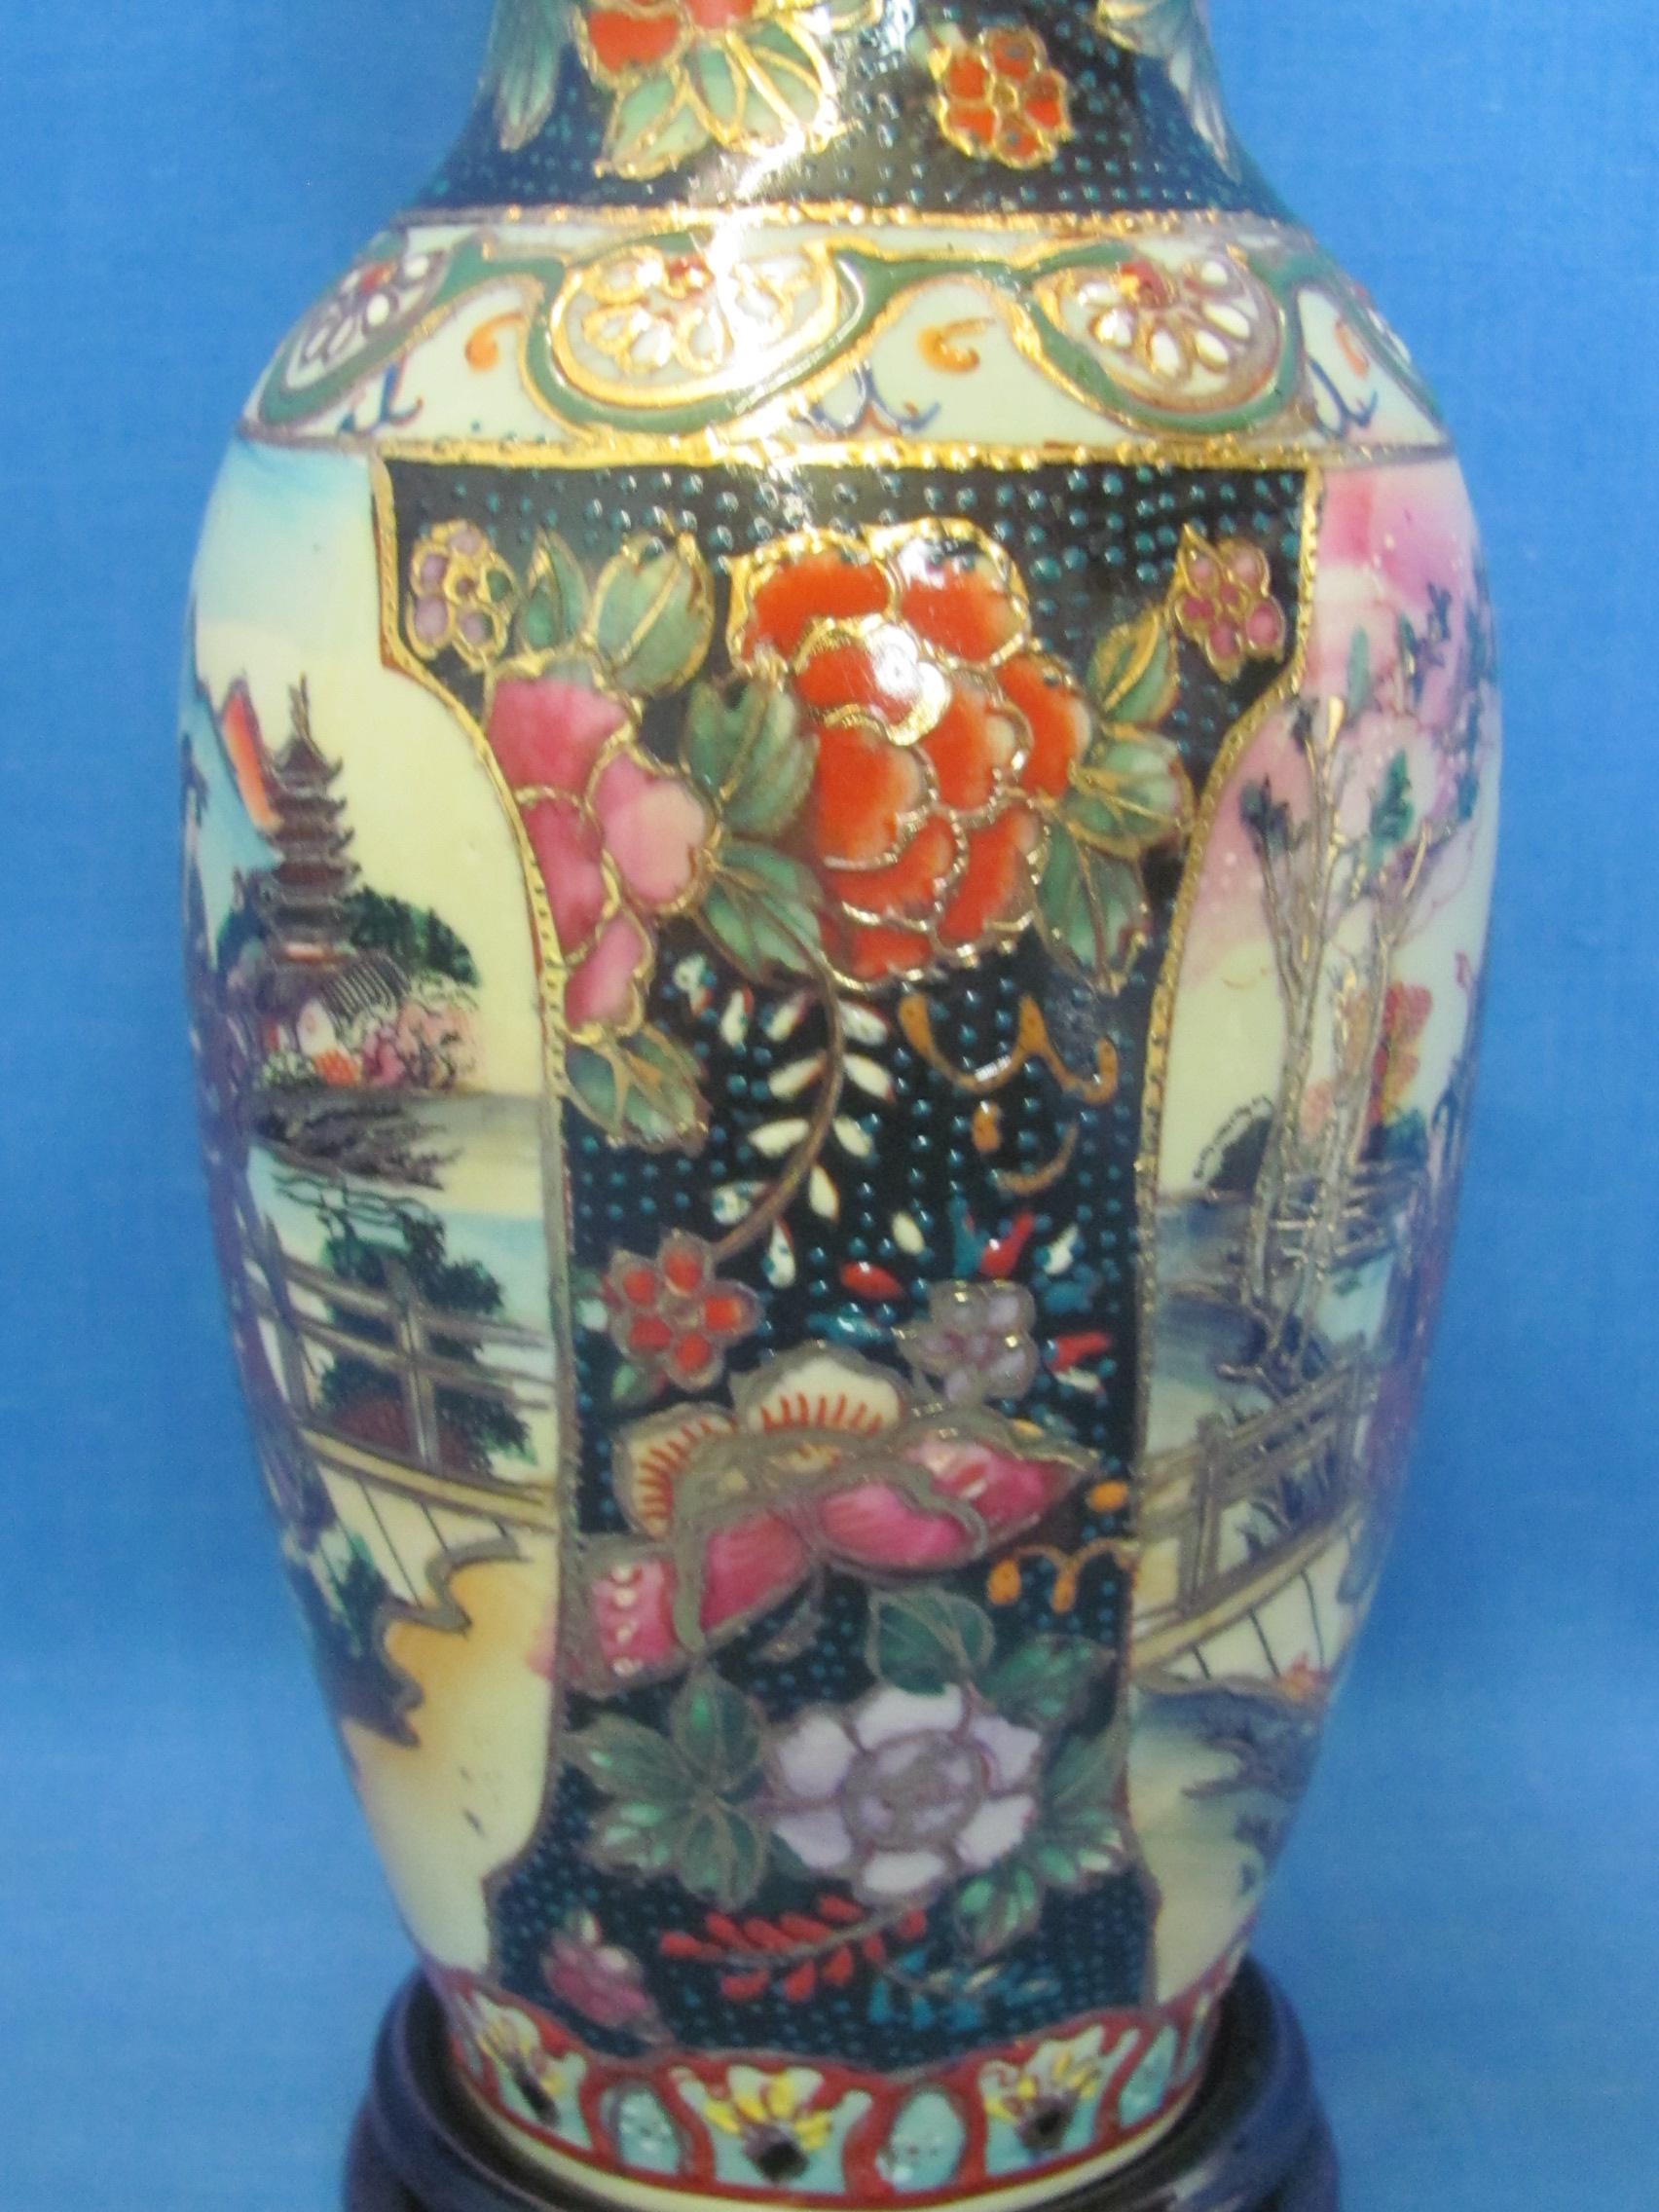 Attractive Chinese Porcelain Vase on Wood Stand – Vase is 8” tall & very colorful